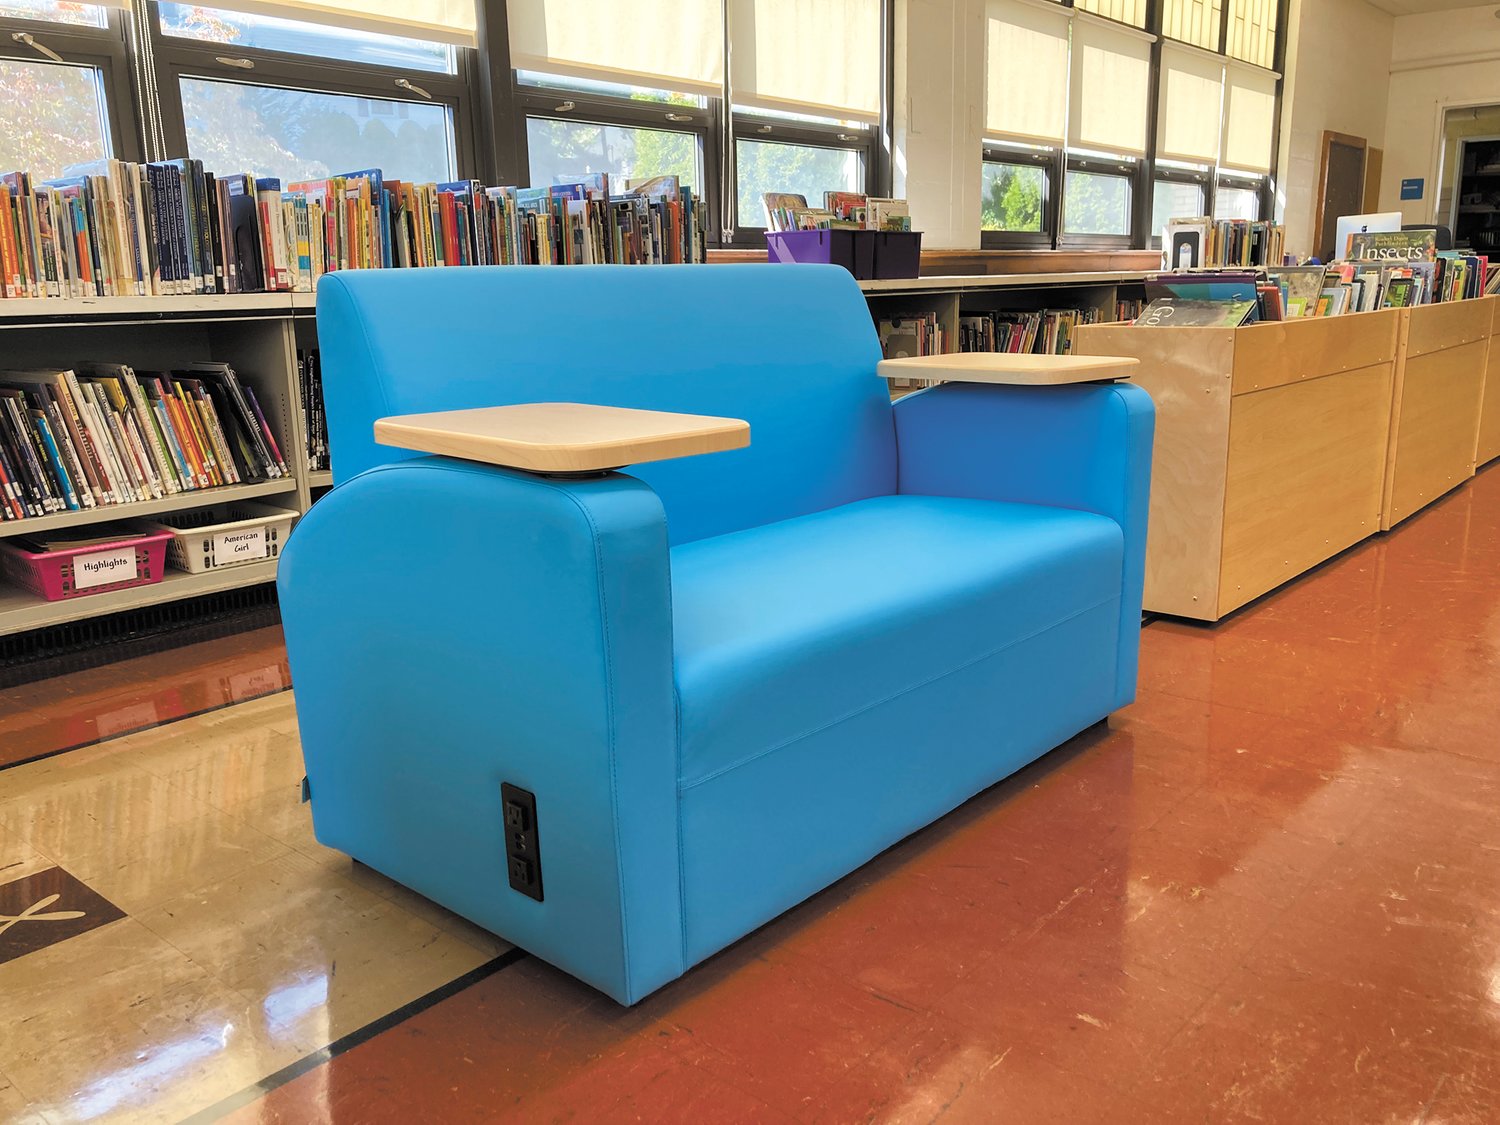 THEY ALL WANT THE COUCHES: Jackson said students all want to sit on the library’s two new, blue couches. This furniture has outlets on each side so students can plug in their laptops while working in this space. (Herald photo)